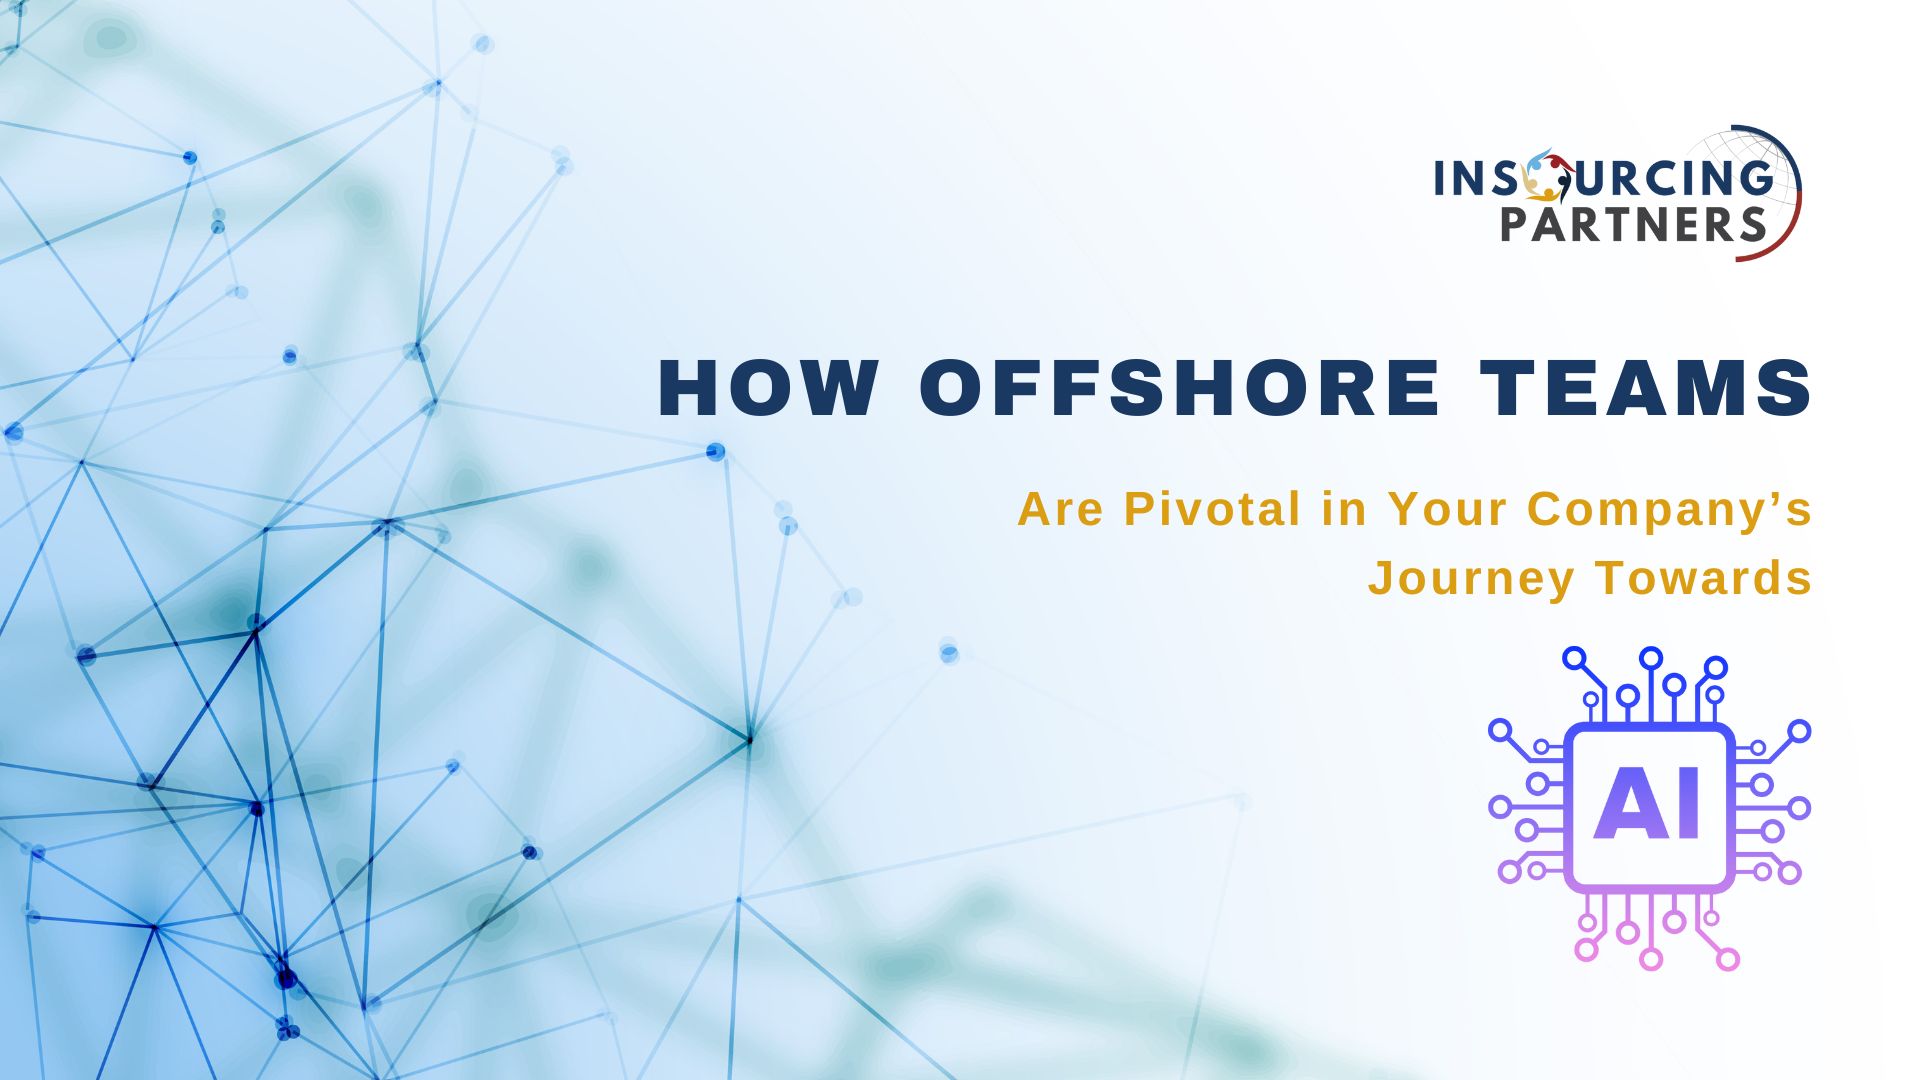 How Offshore Teams Are Pivotal in Your Company’s Journey Towards AI